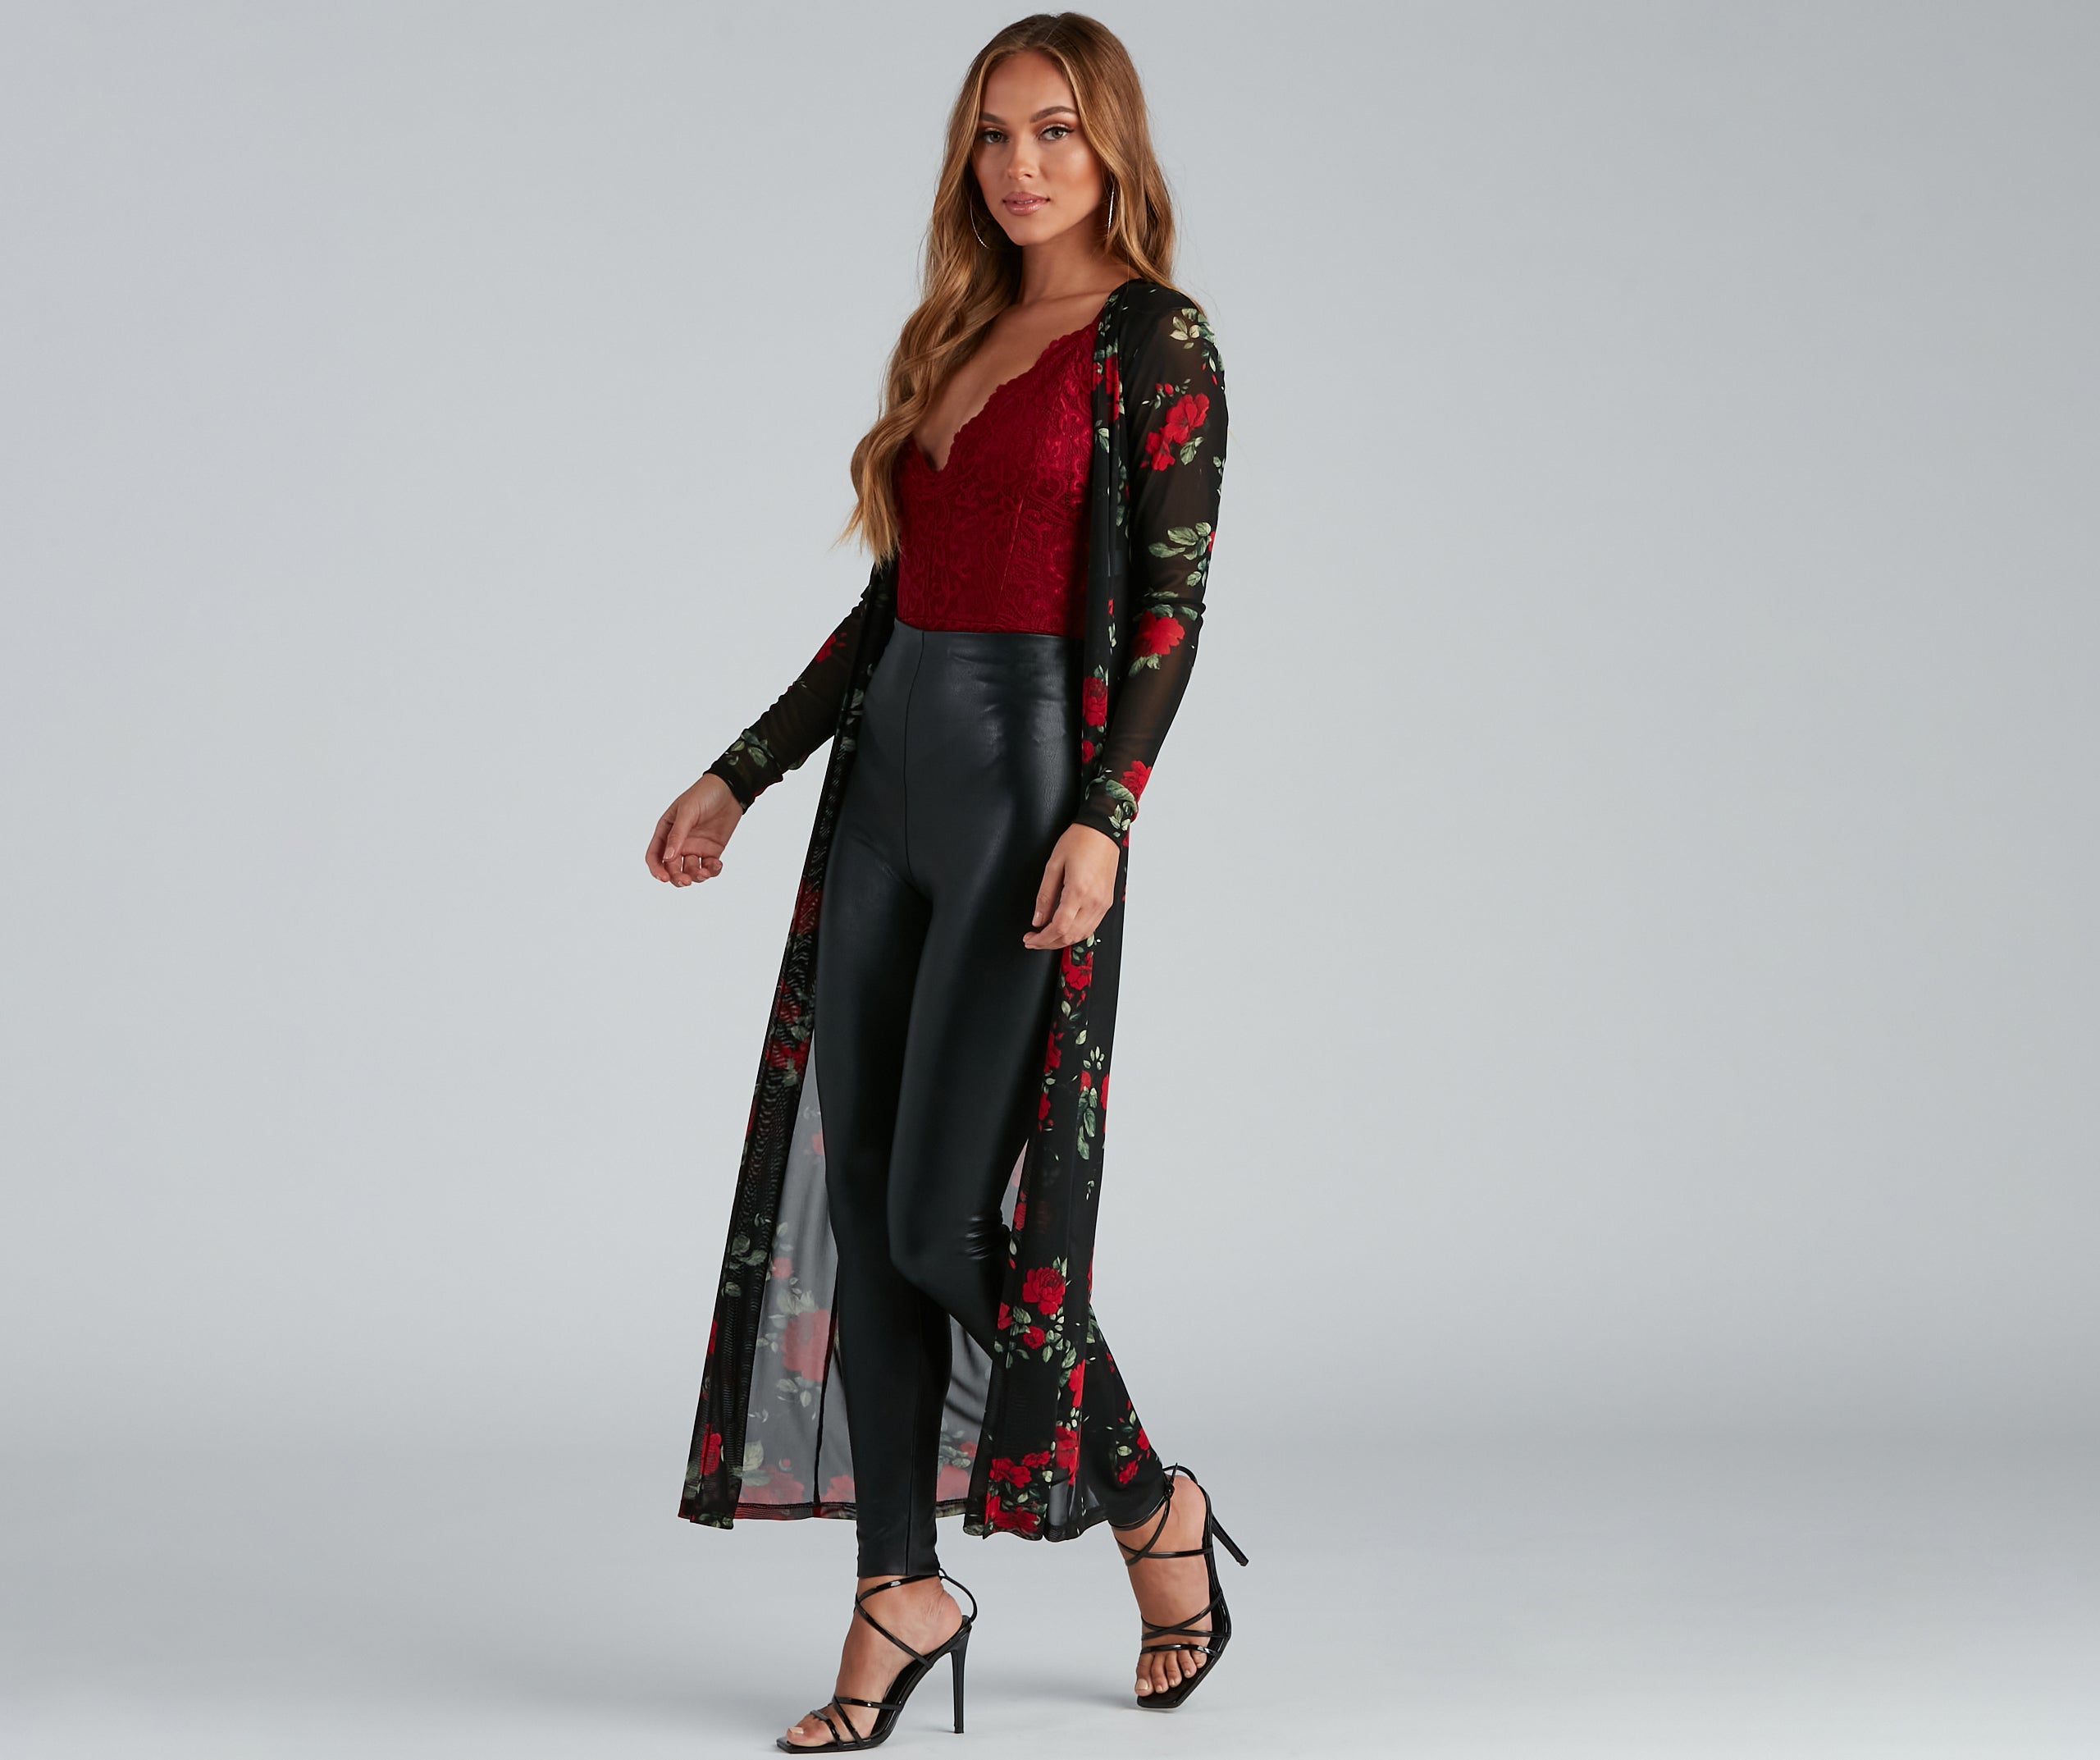 Blooming Beauty Floral Print Duster